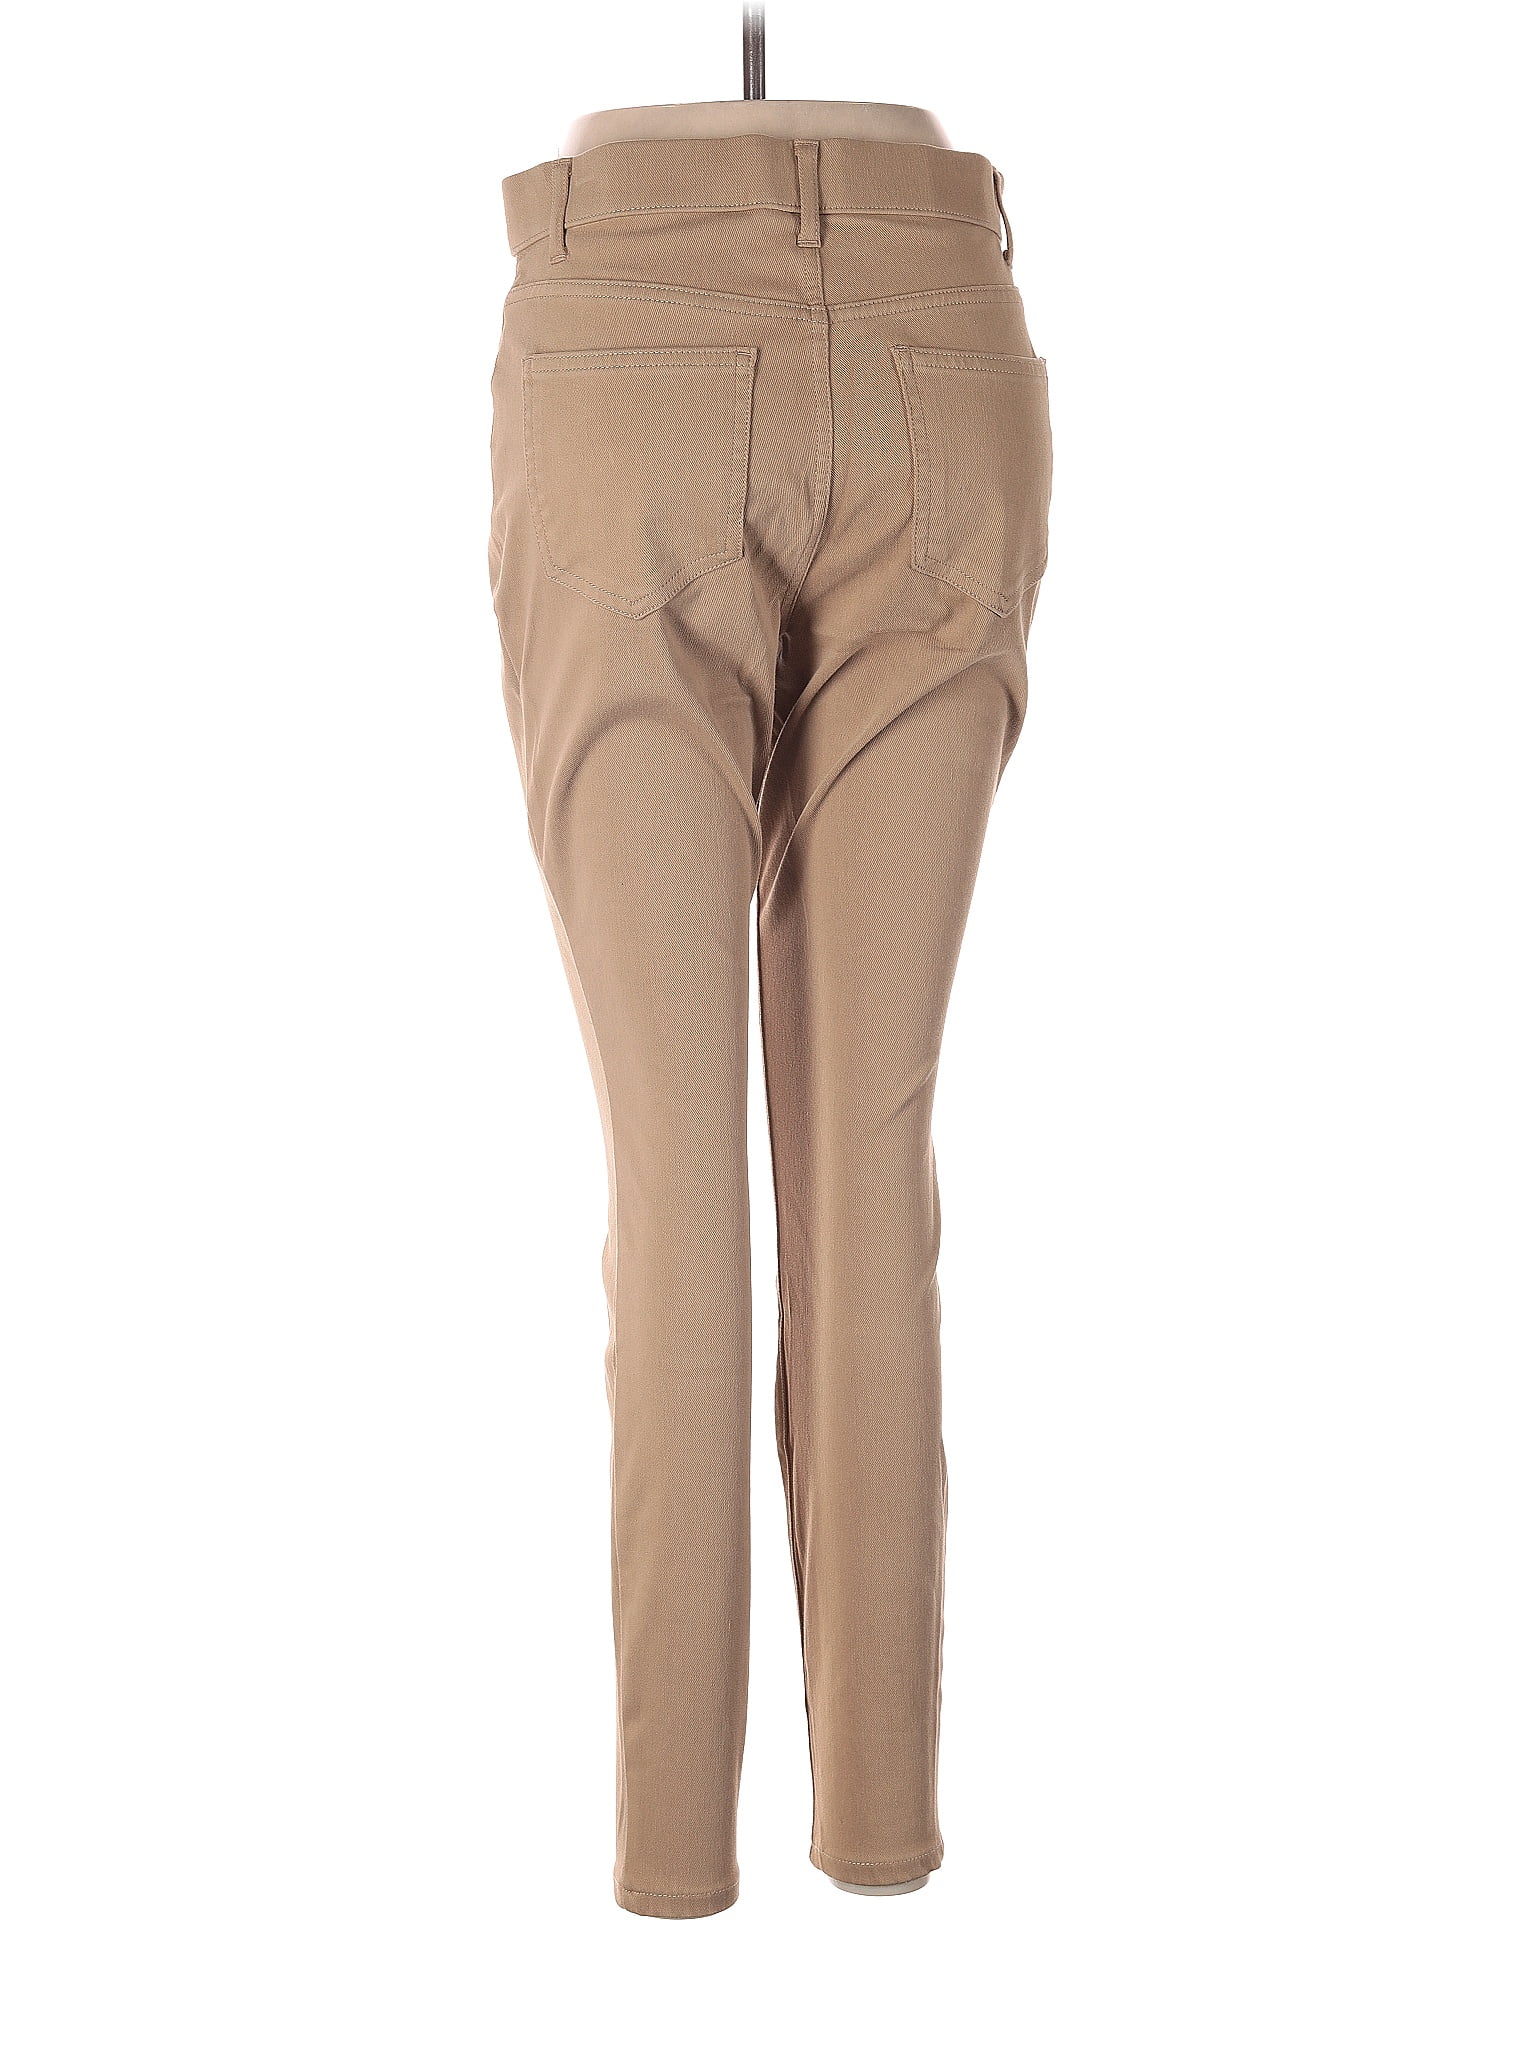 Time and Tru Solid Tan Jeggings Size M - 38% off